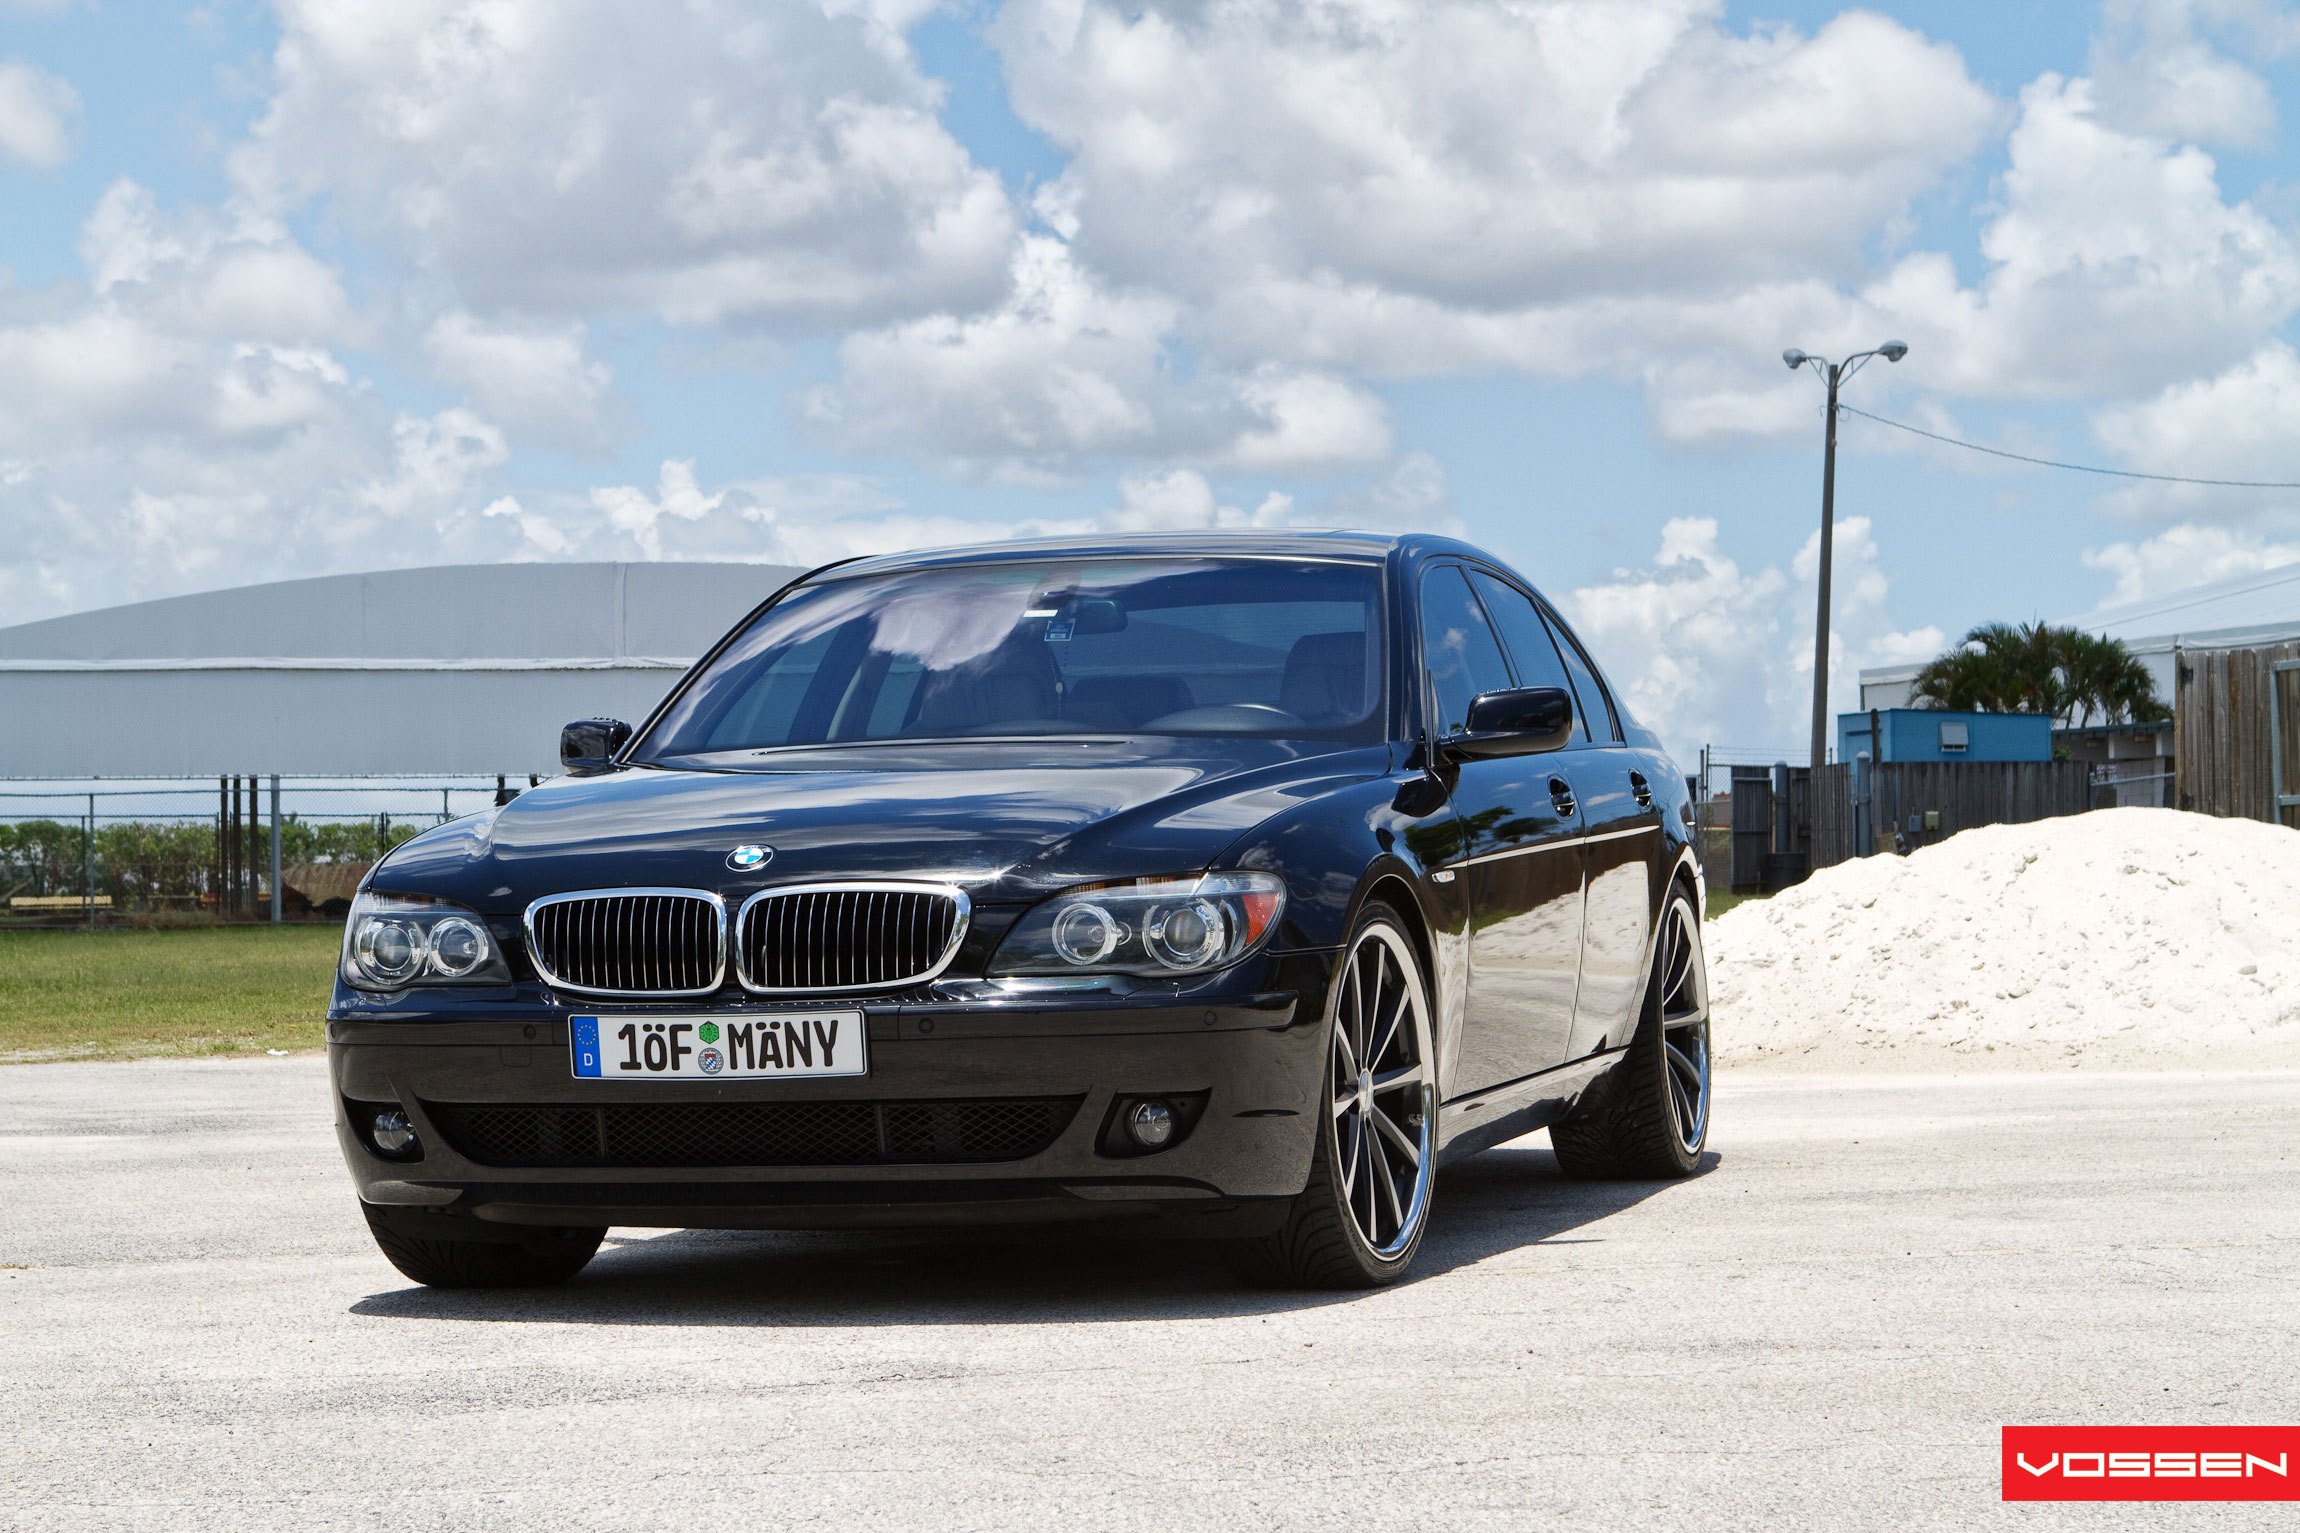 Black BMW 7-Series with Chrome Grille - Photo by Vossen